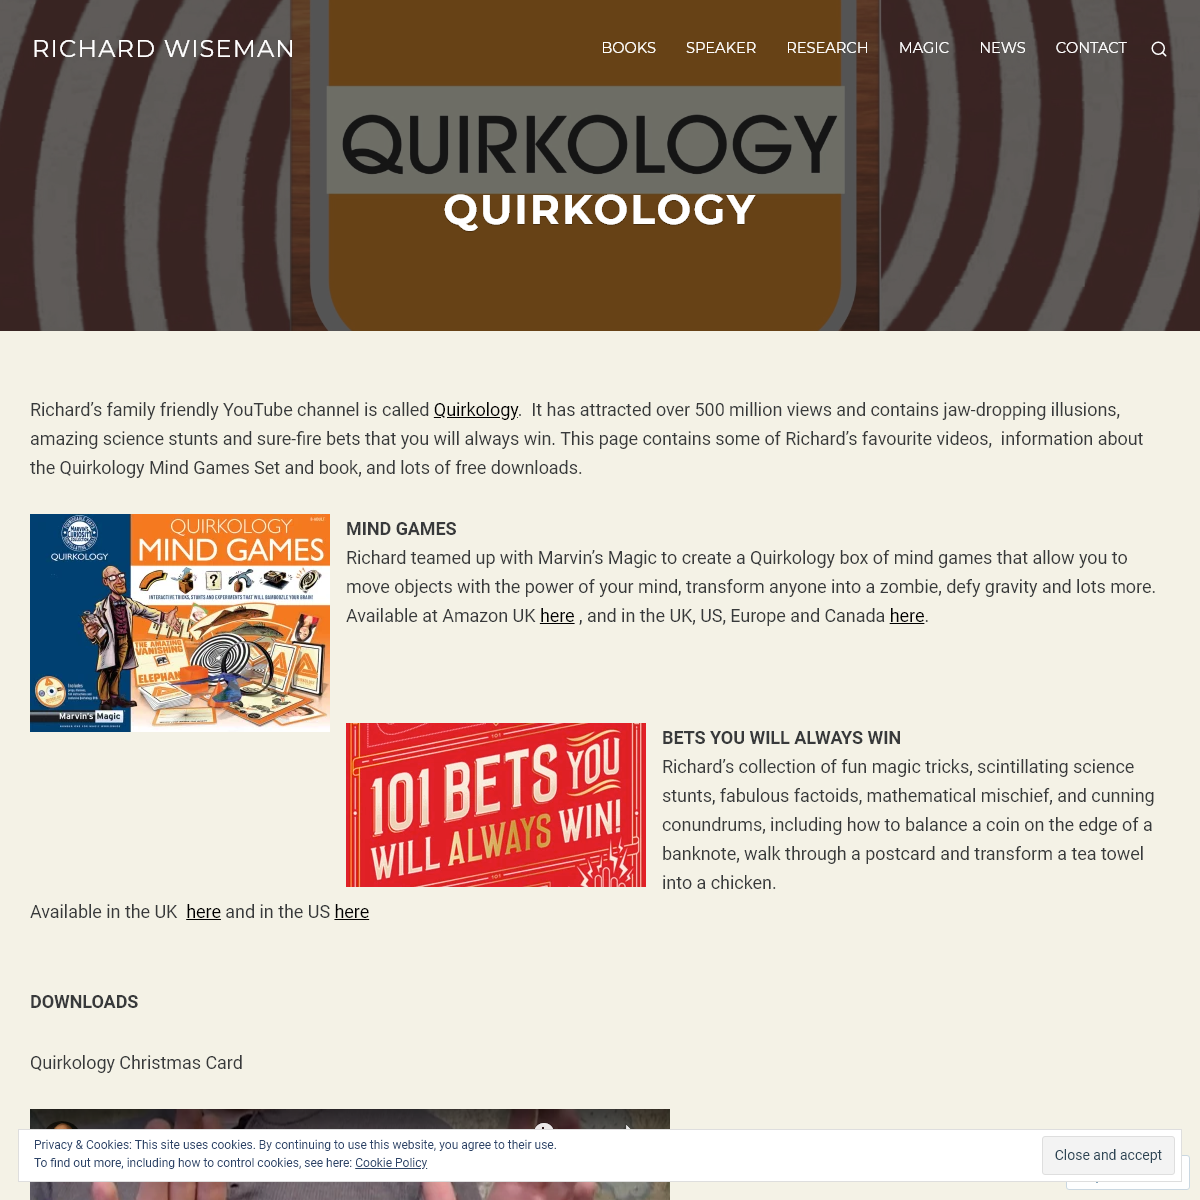 A complete backup of quirkology.com